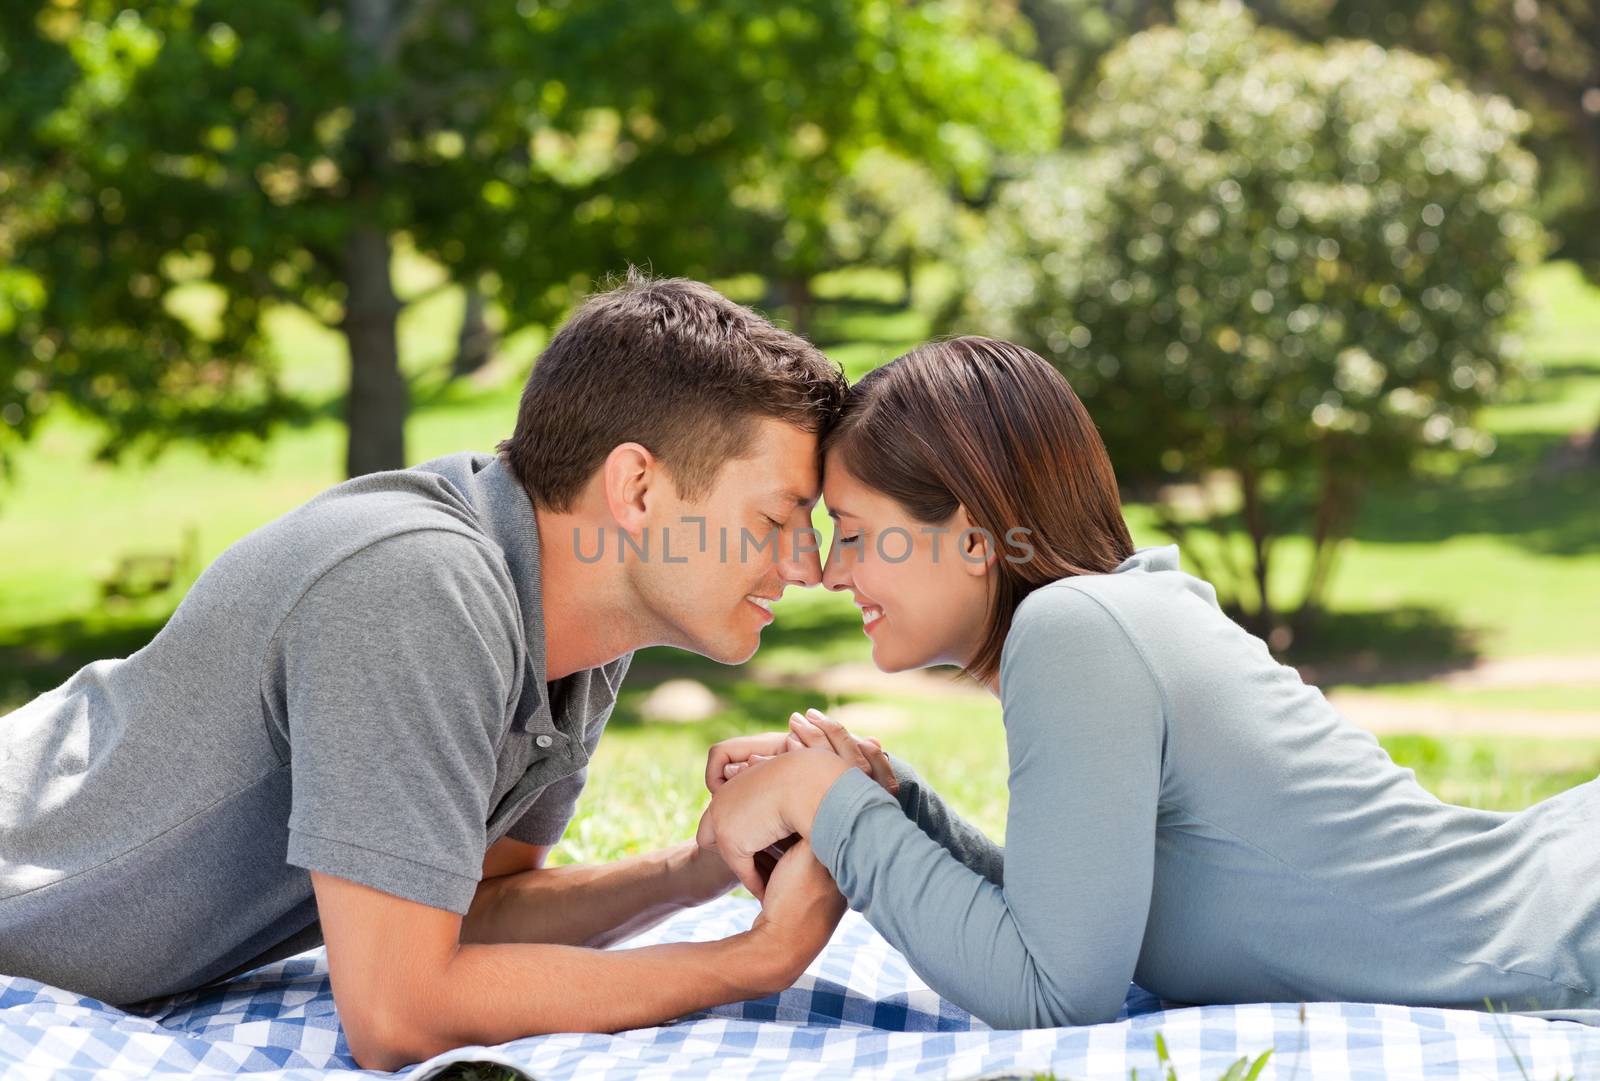 Enamored couple in the park  by Wavebreakmedia